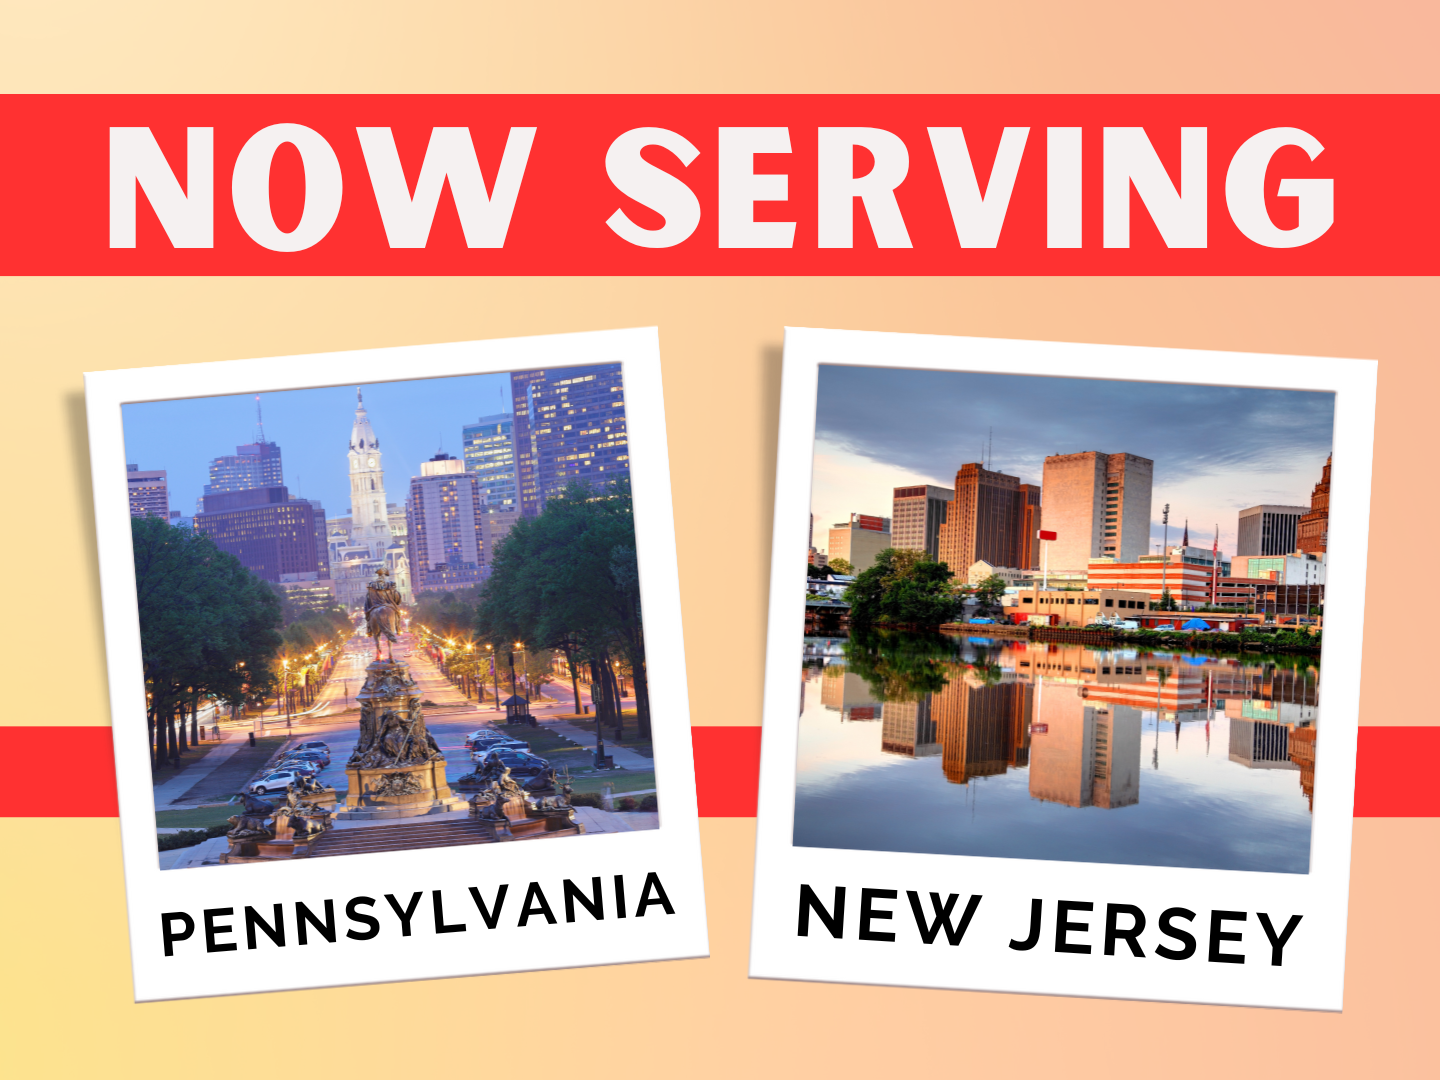 Exciting news! John Servider State Farm is expanding our services to residents in Pennsylvania and New Jersey, catering to all your insurance needs. Whether you're in Pennsylvania or New Jersey, you can now reach out via phone or visit our website for a complimentary quote.